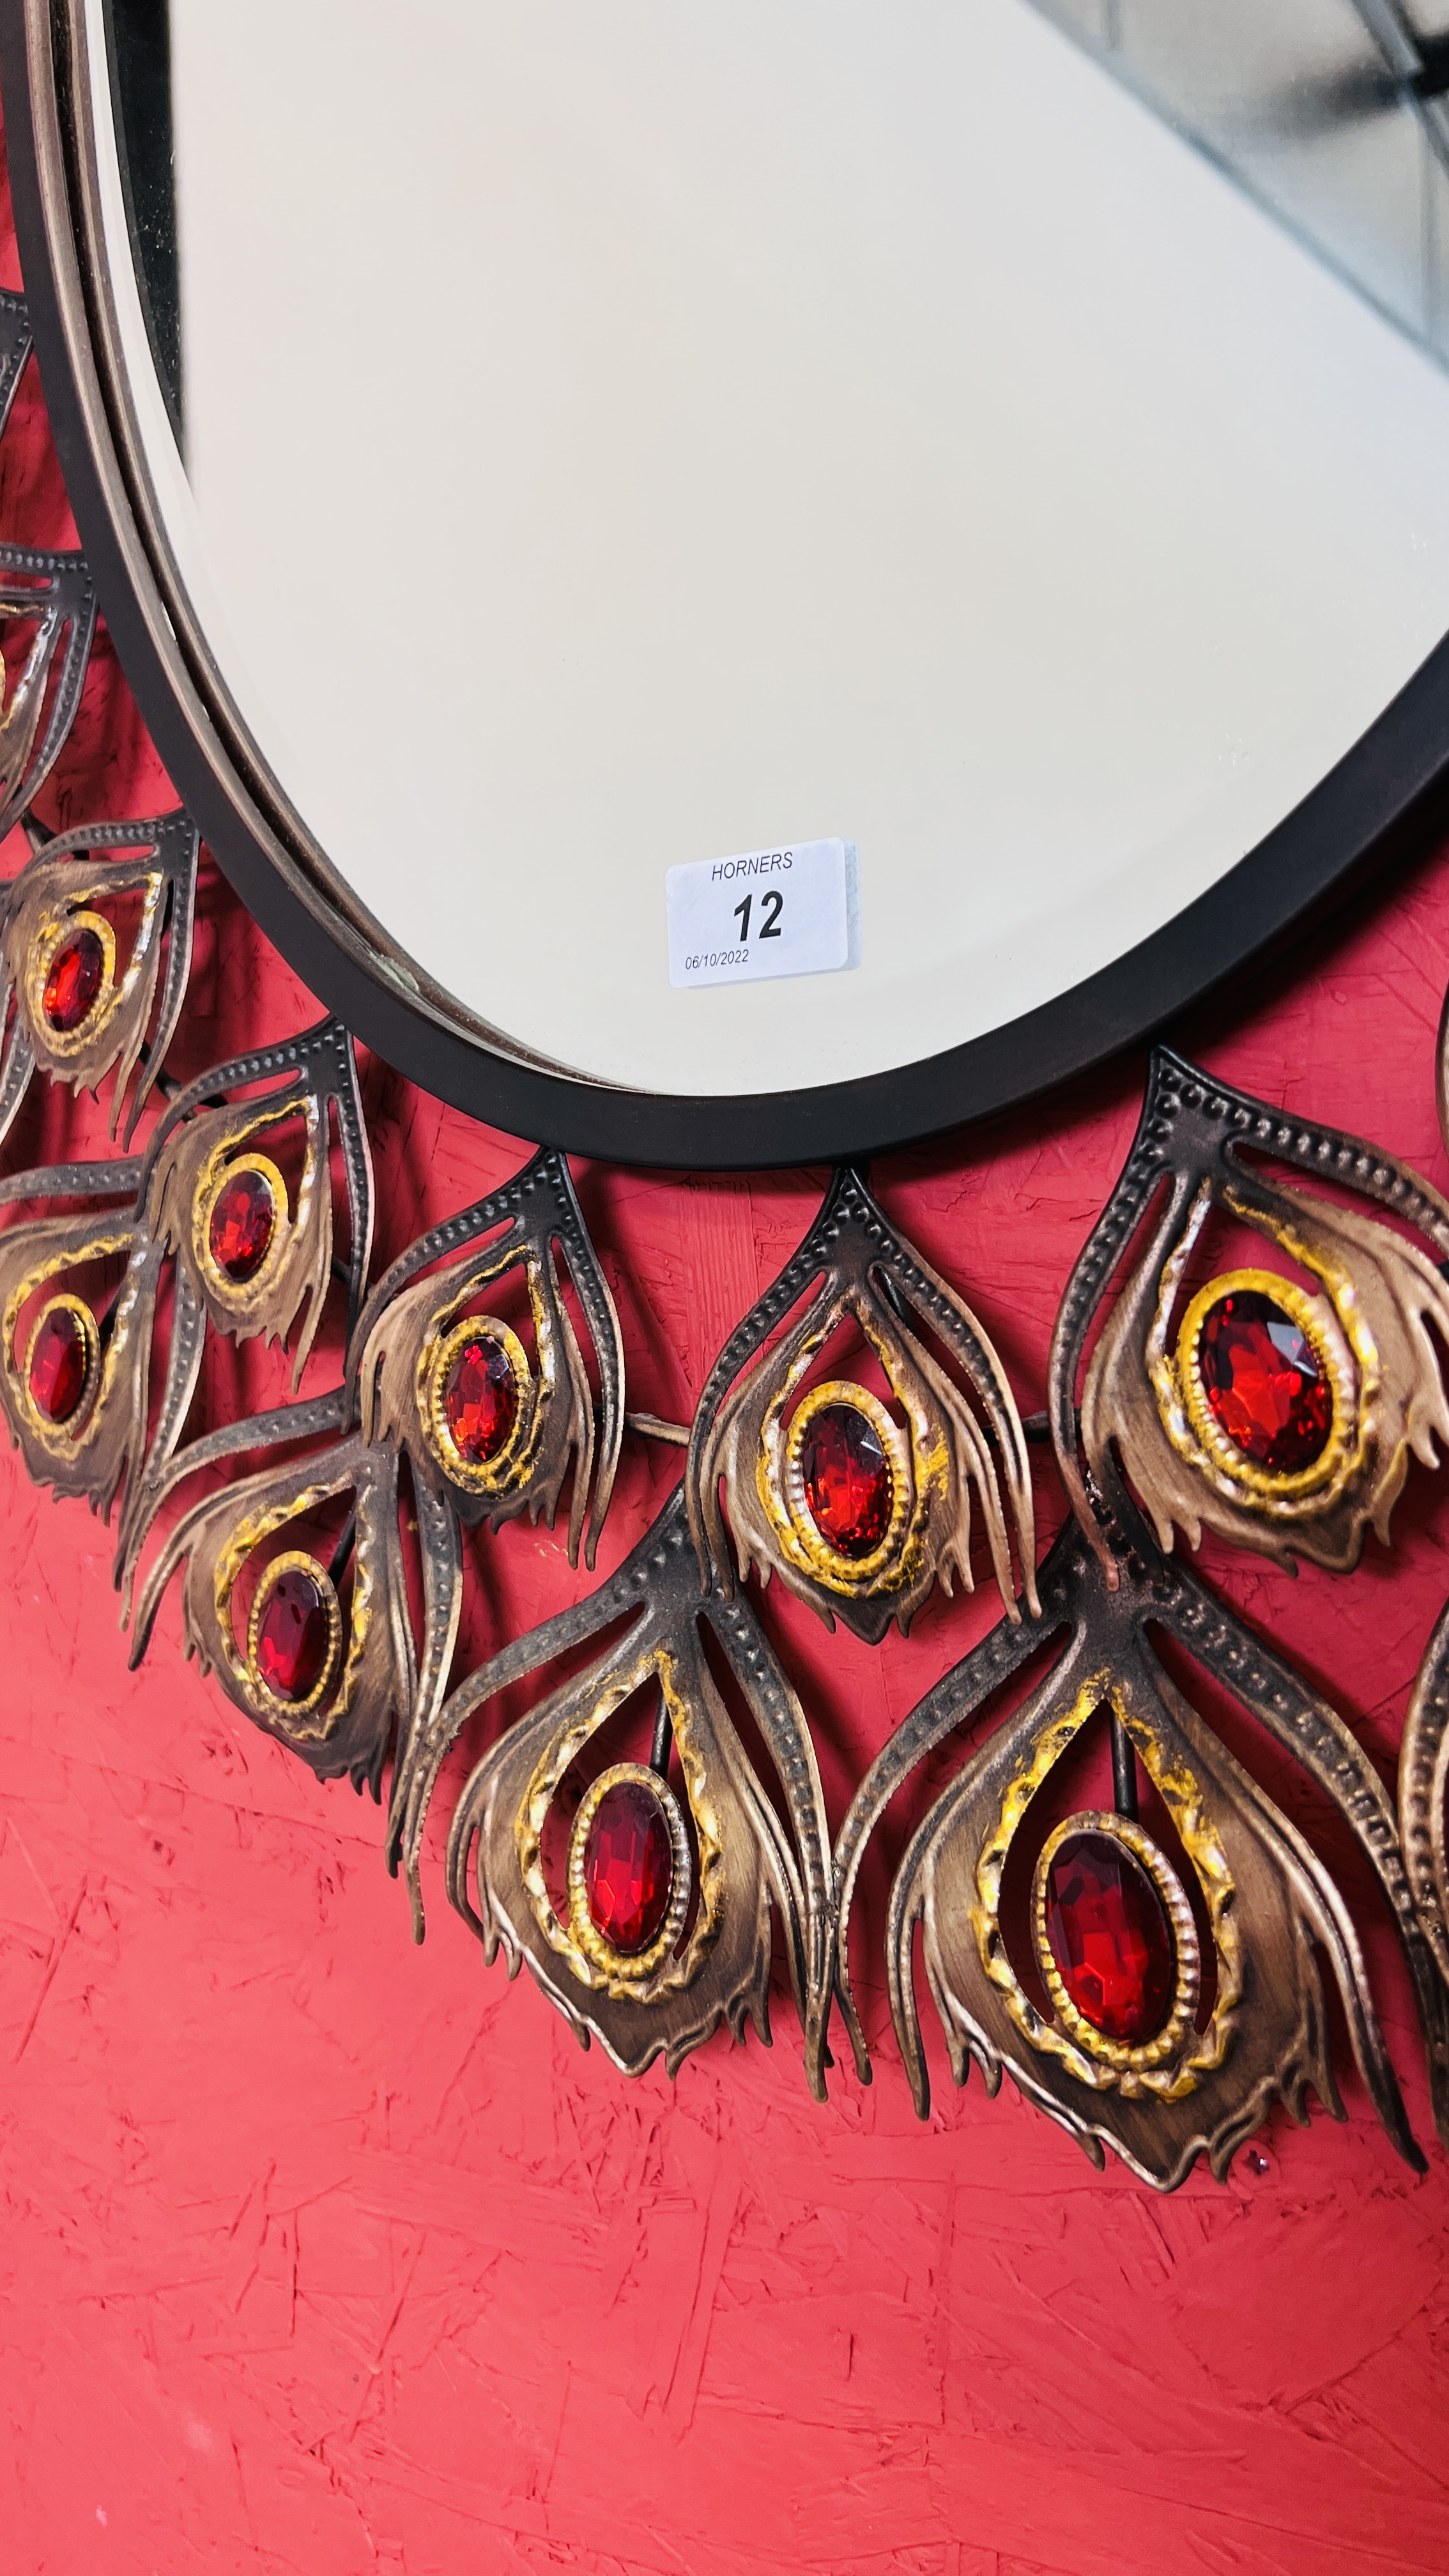 A MODERN DESIGNER METAL CRAFT OVAL WALL MIRROR OF PEACOCK FEATHER DESIGN - Image 3 of 4